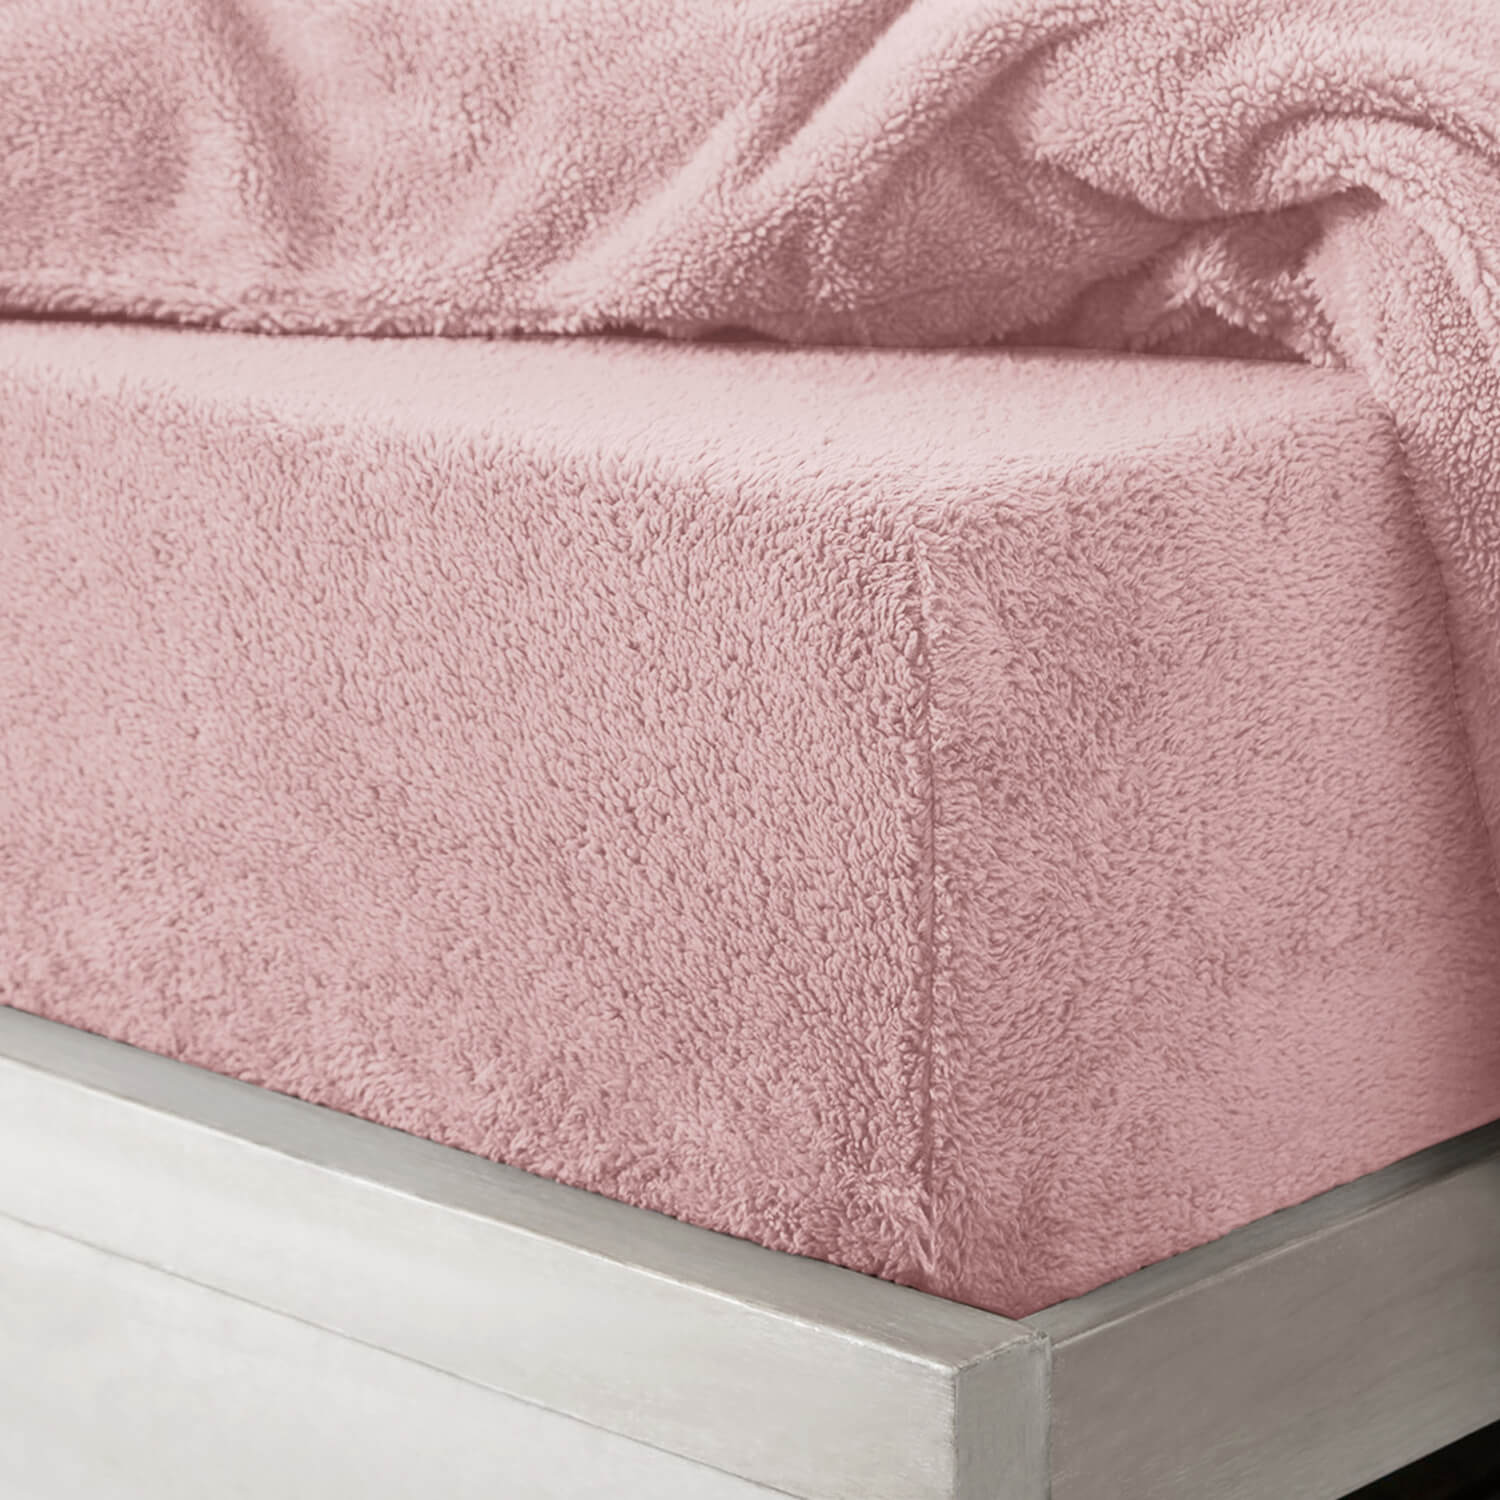 The Home Bedroom Teddy Supersoft Fitted Sheet - Blush 1 Shaws Department Stores